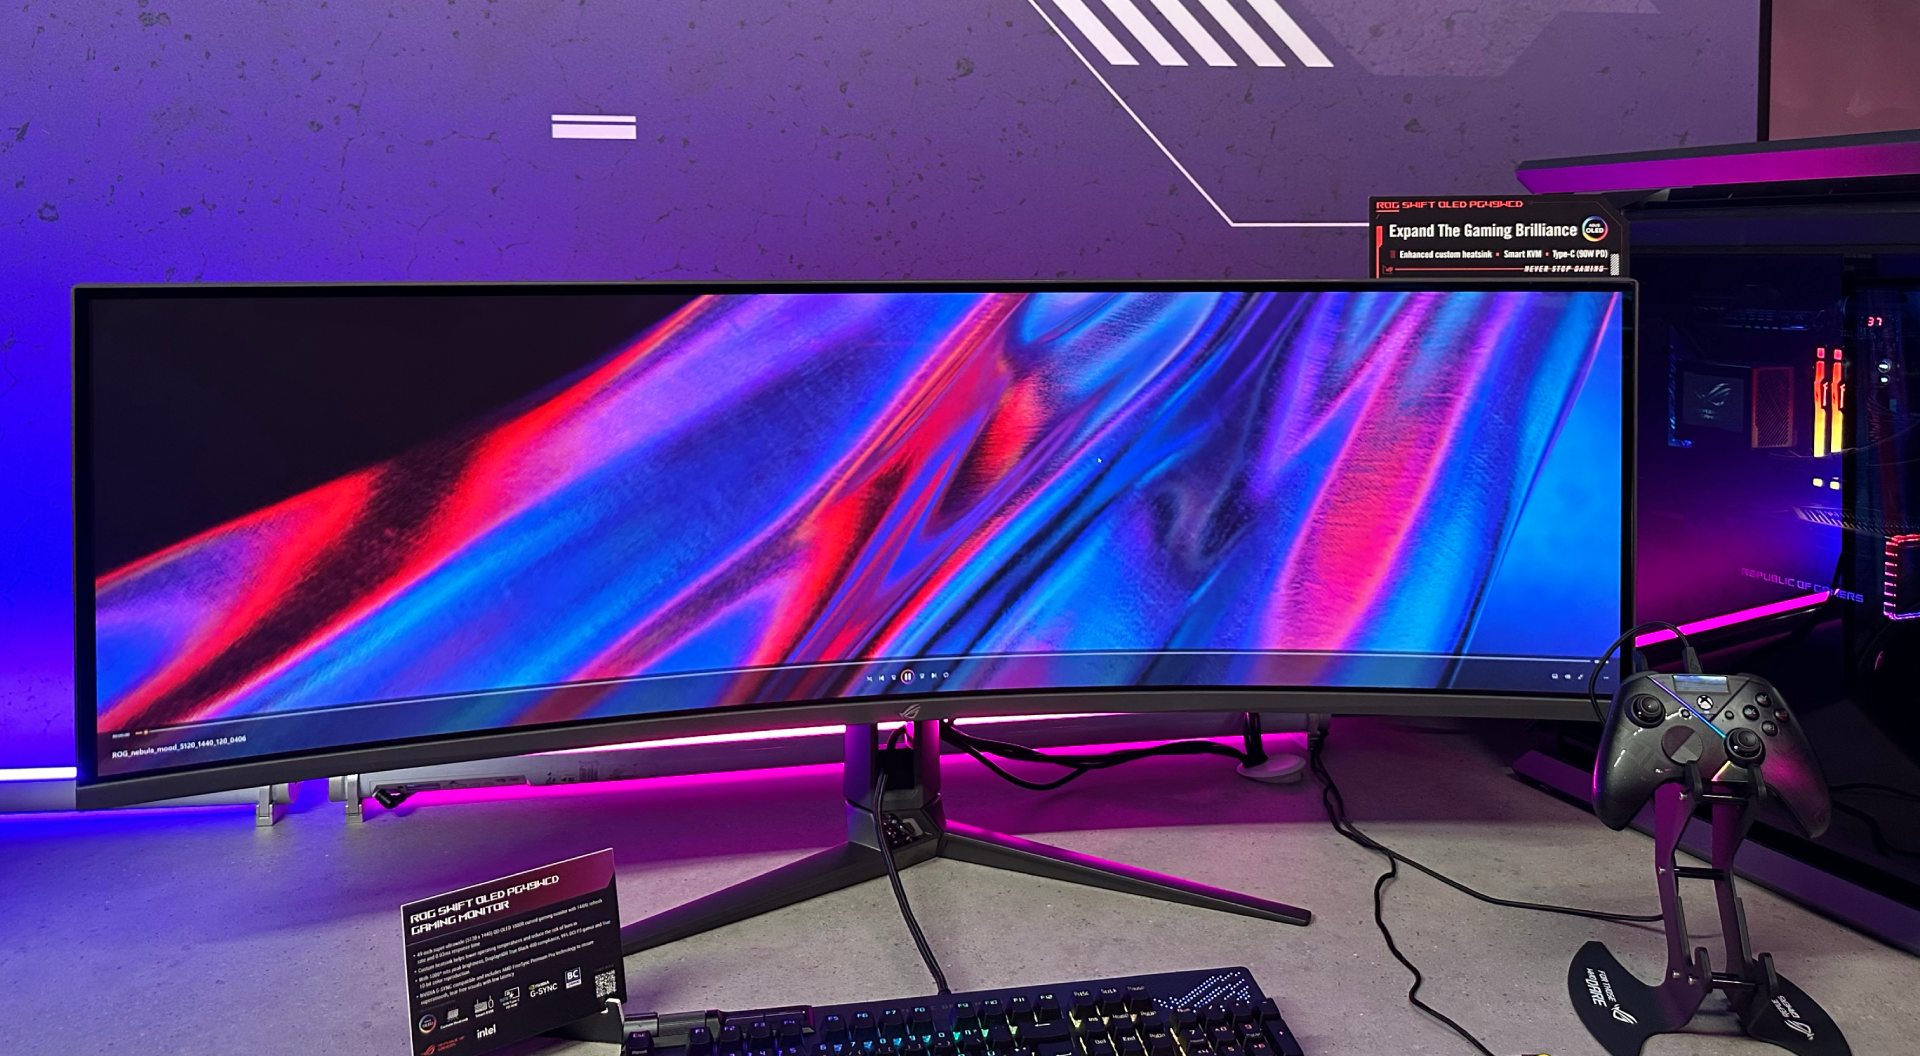 Stunning 240Hz 32-inch 4K OLED monitor is star of Asus's Gamescom ...